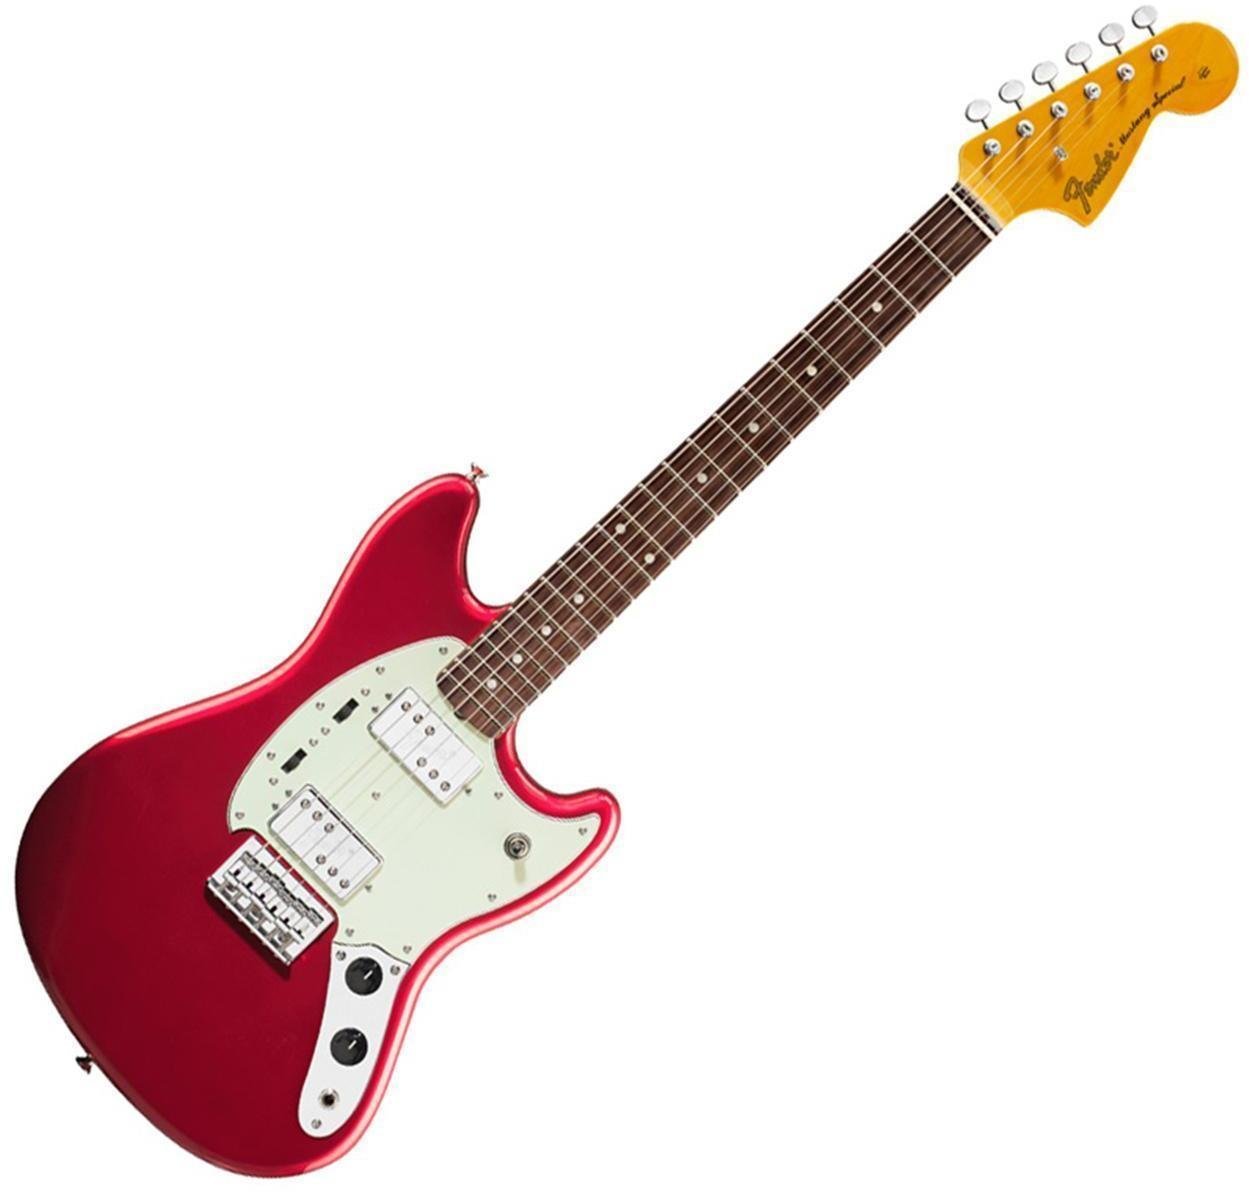 Chitarra Elettrica Fender Pawn Shop Mustang Special, Rosewood Fingerboard, Candy Apple Red